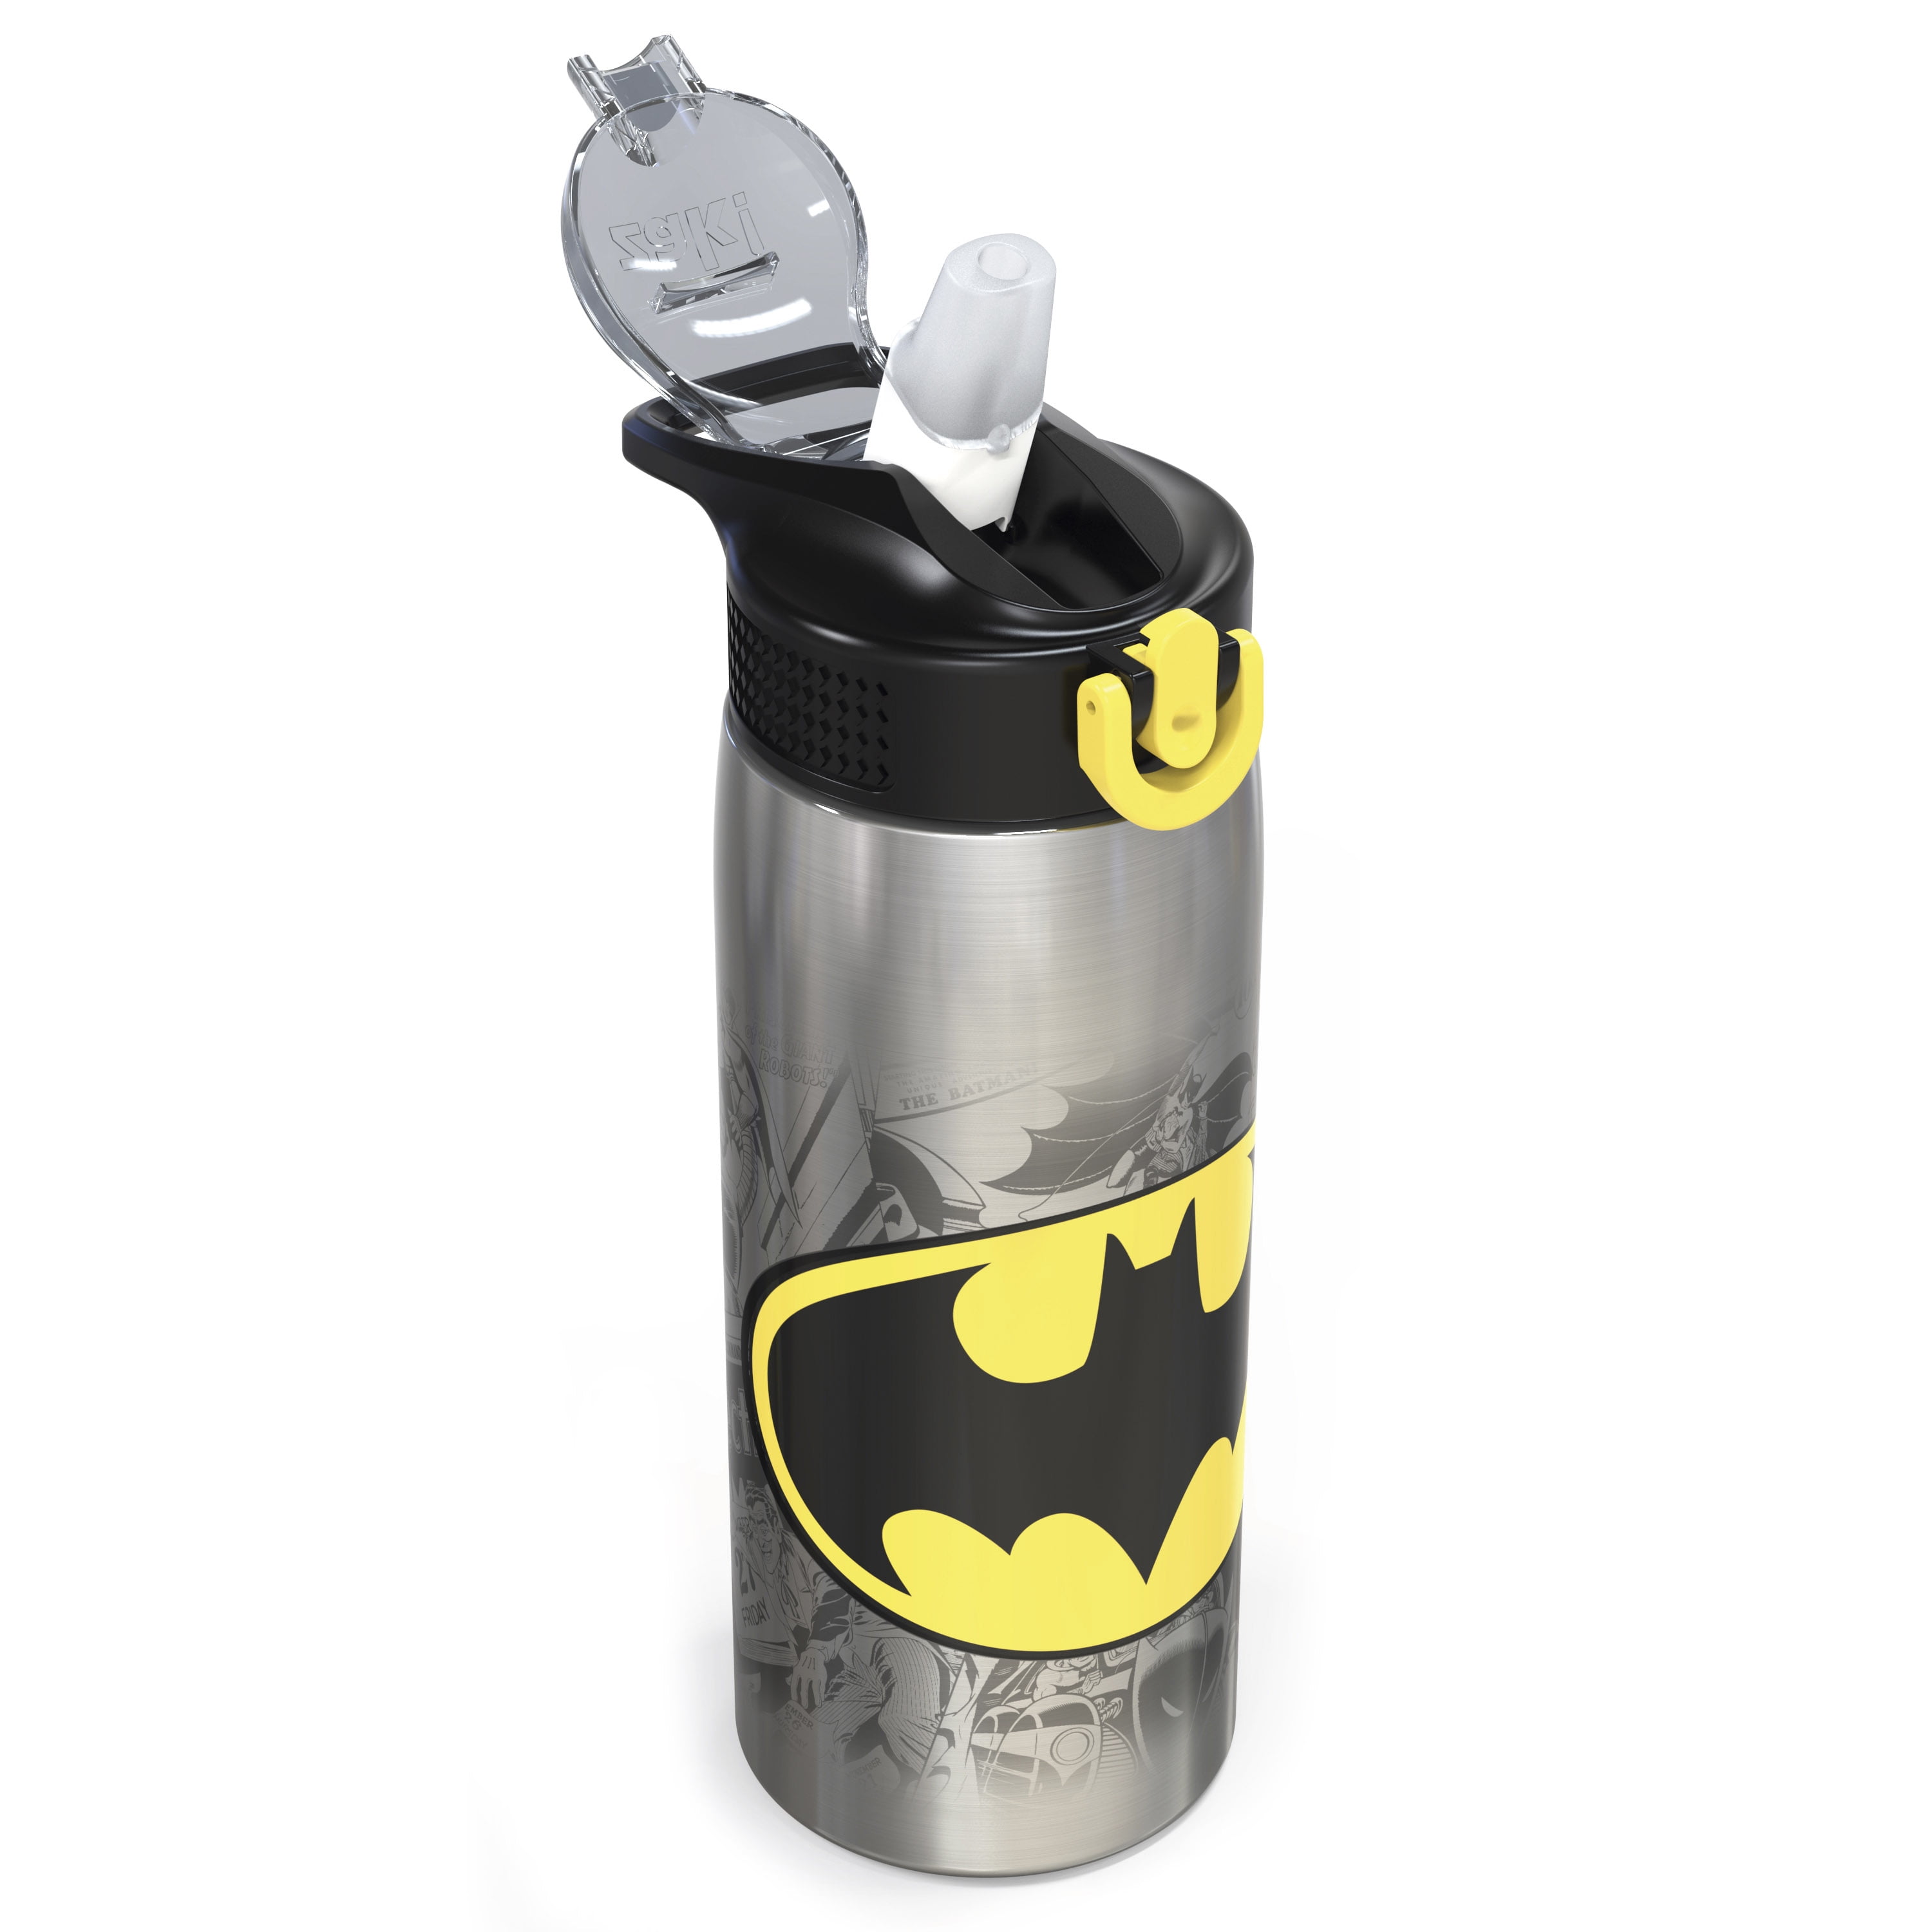 Durable Cup for Sports or Travel Zak Designs 27oz DC Comics 18/8 Single Wall Stainless Steel Water Bottle with Flip-up Straw Spout and Locking Spout Cover 27oz, Batman 